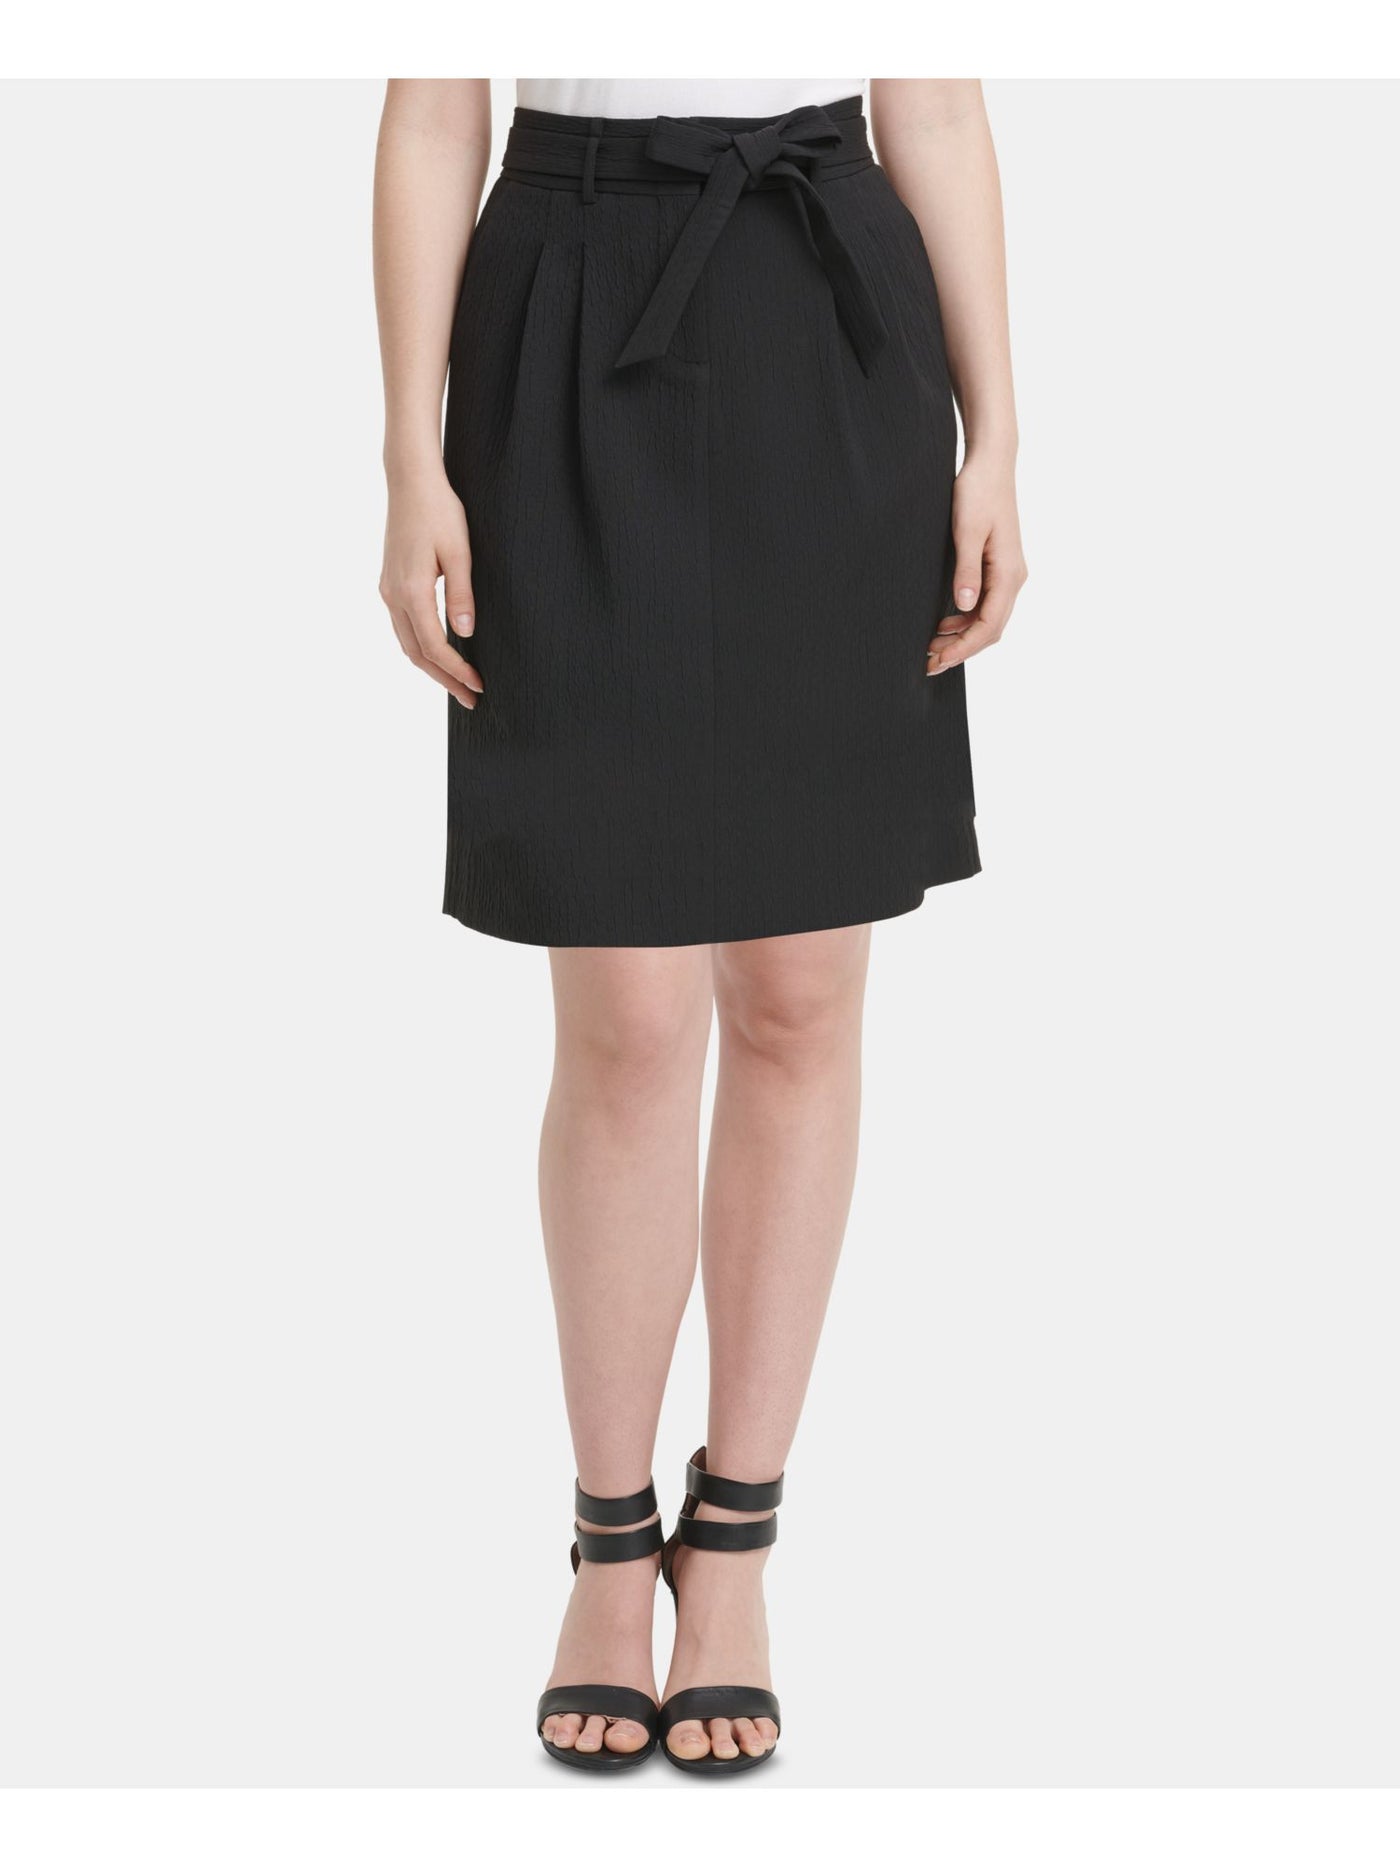 DKNY Womens Black Belted Knee Length A-Line Skirt Size: 2